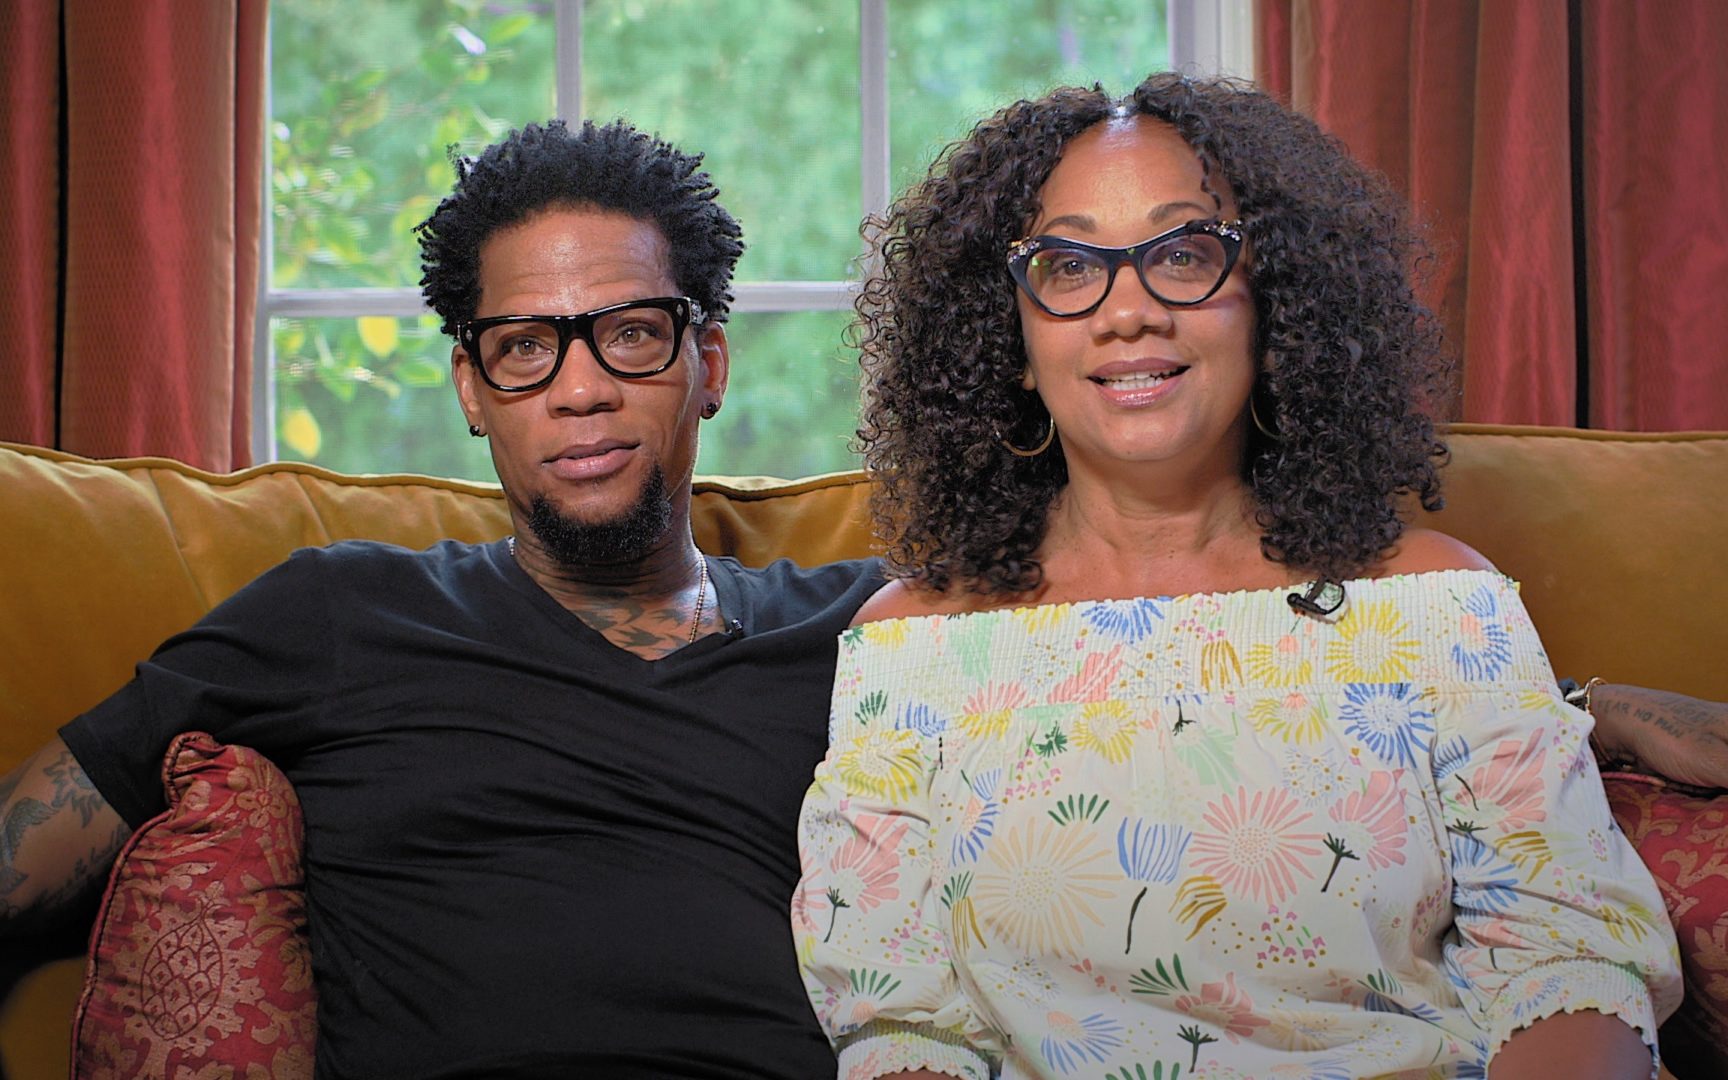 Nationally celebrated radio host/comedian, DL Hughley and his wife LaDonna Hughley...